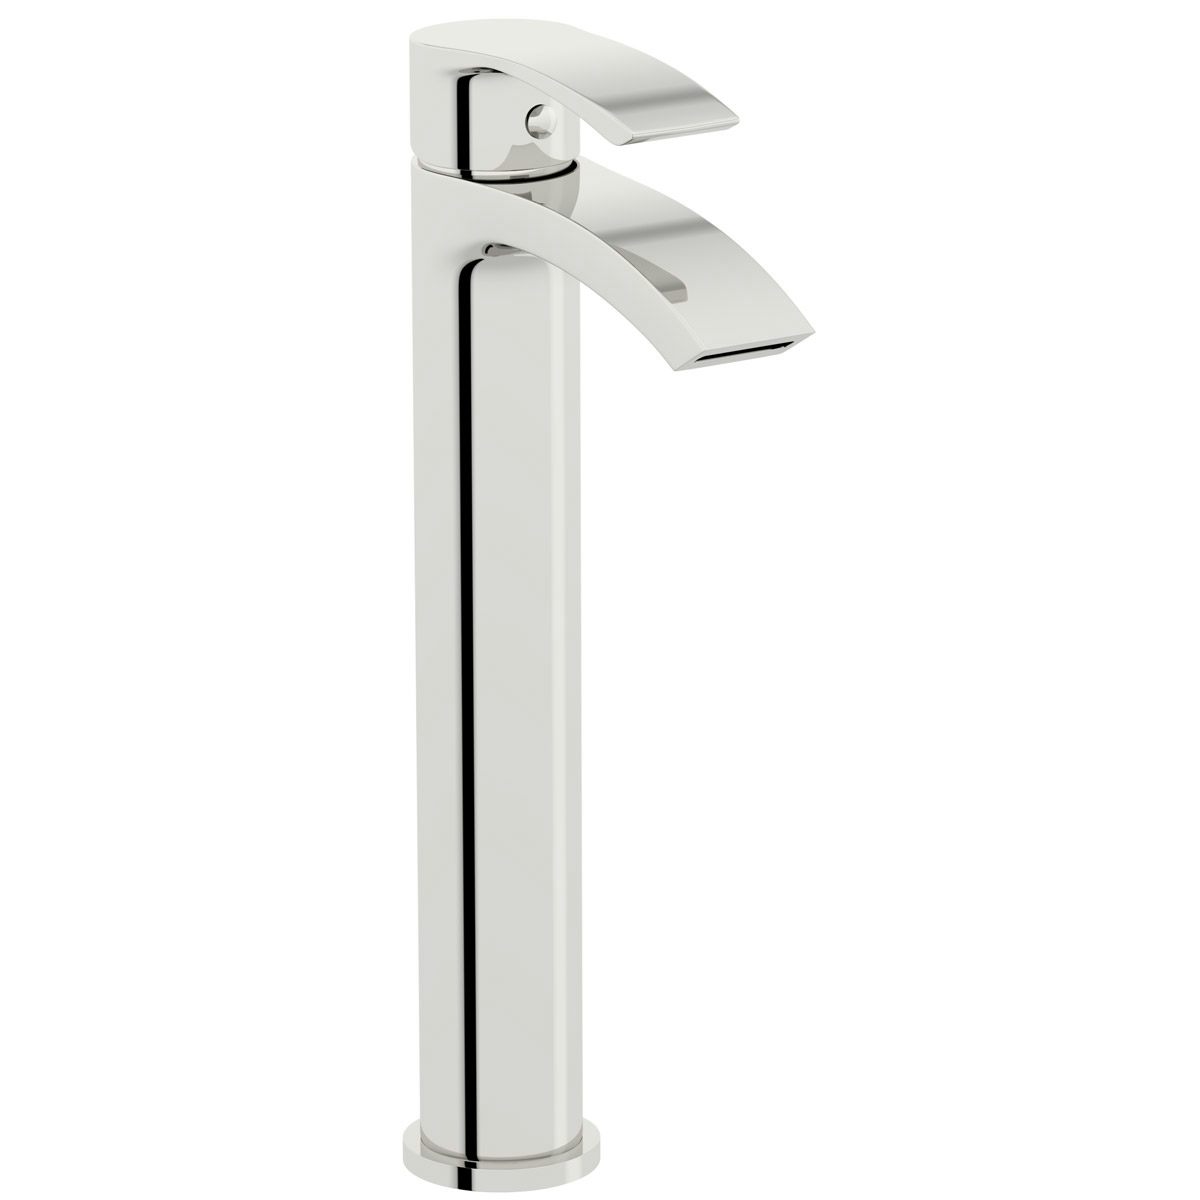 Orchard Wye round high rise basin mixer tap with slotted waste